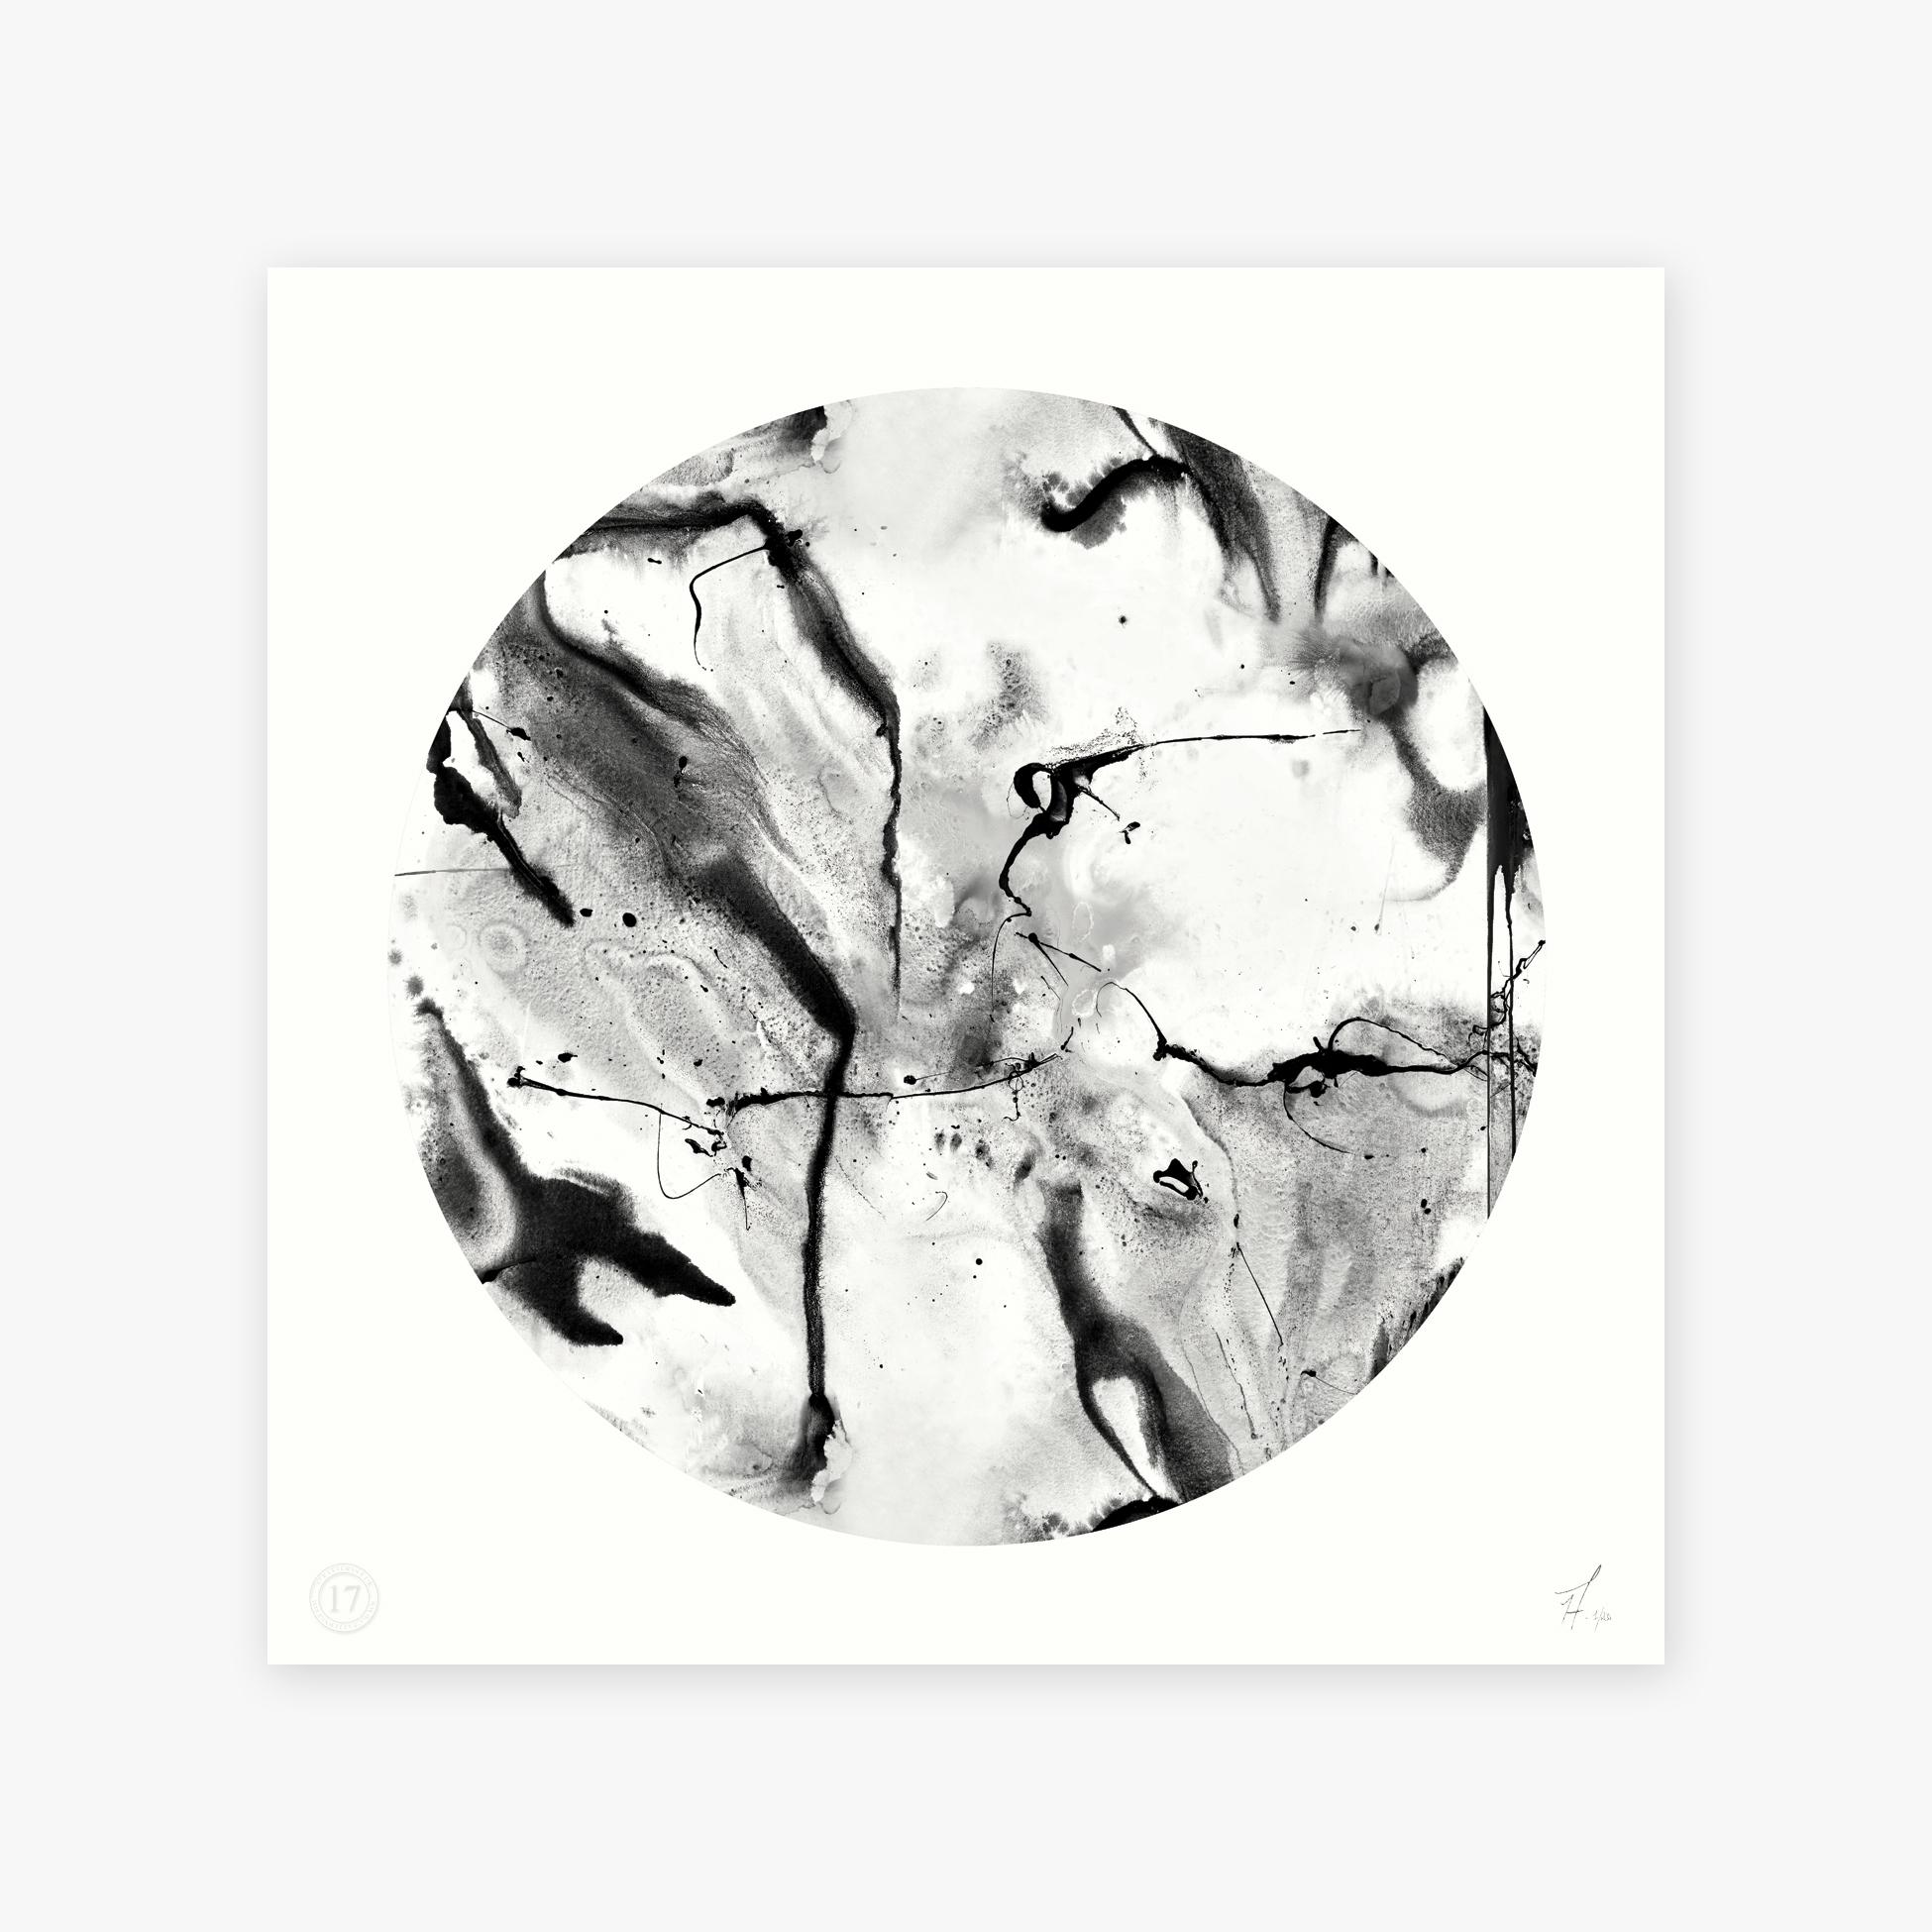 Tile: Whirling Dervish circle white
Artist: 17 Patterns with Paris
Description: Archival Giclee art print on German Etch 310gsm Paper
Color: Black and white
Size options: 80 x 80cm, 60 x 60cm, 40 x 40cm
Edition: 200
Authentication: Signed and